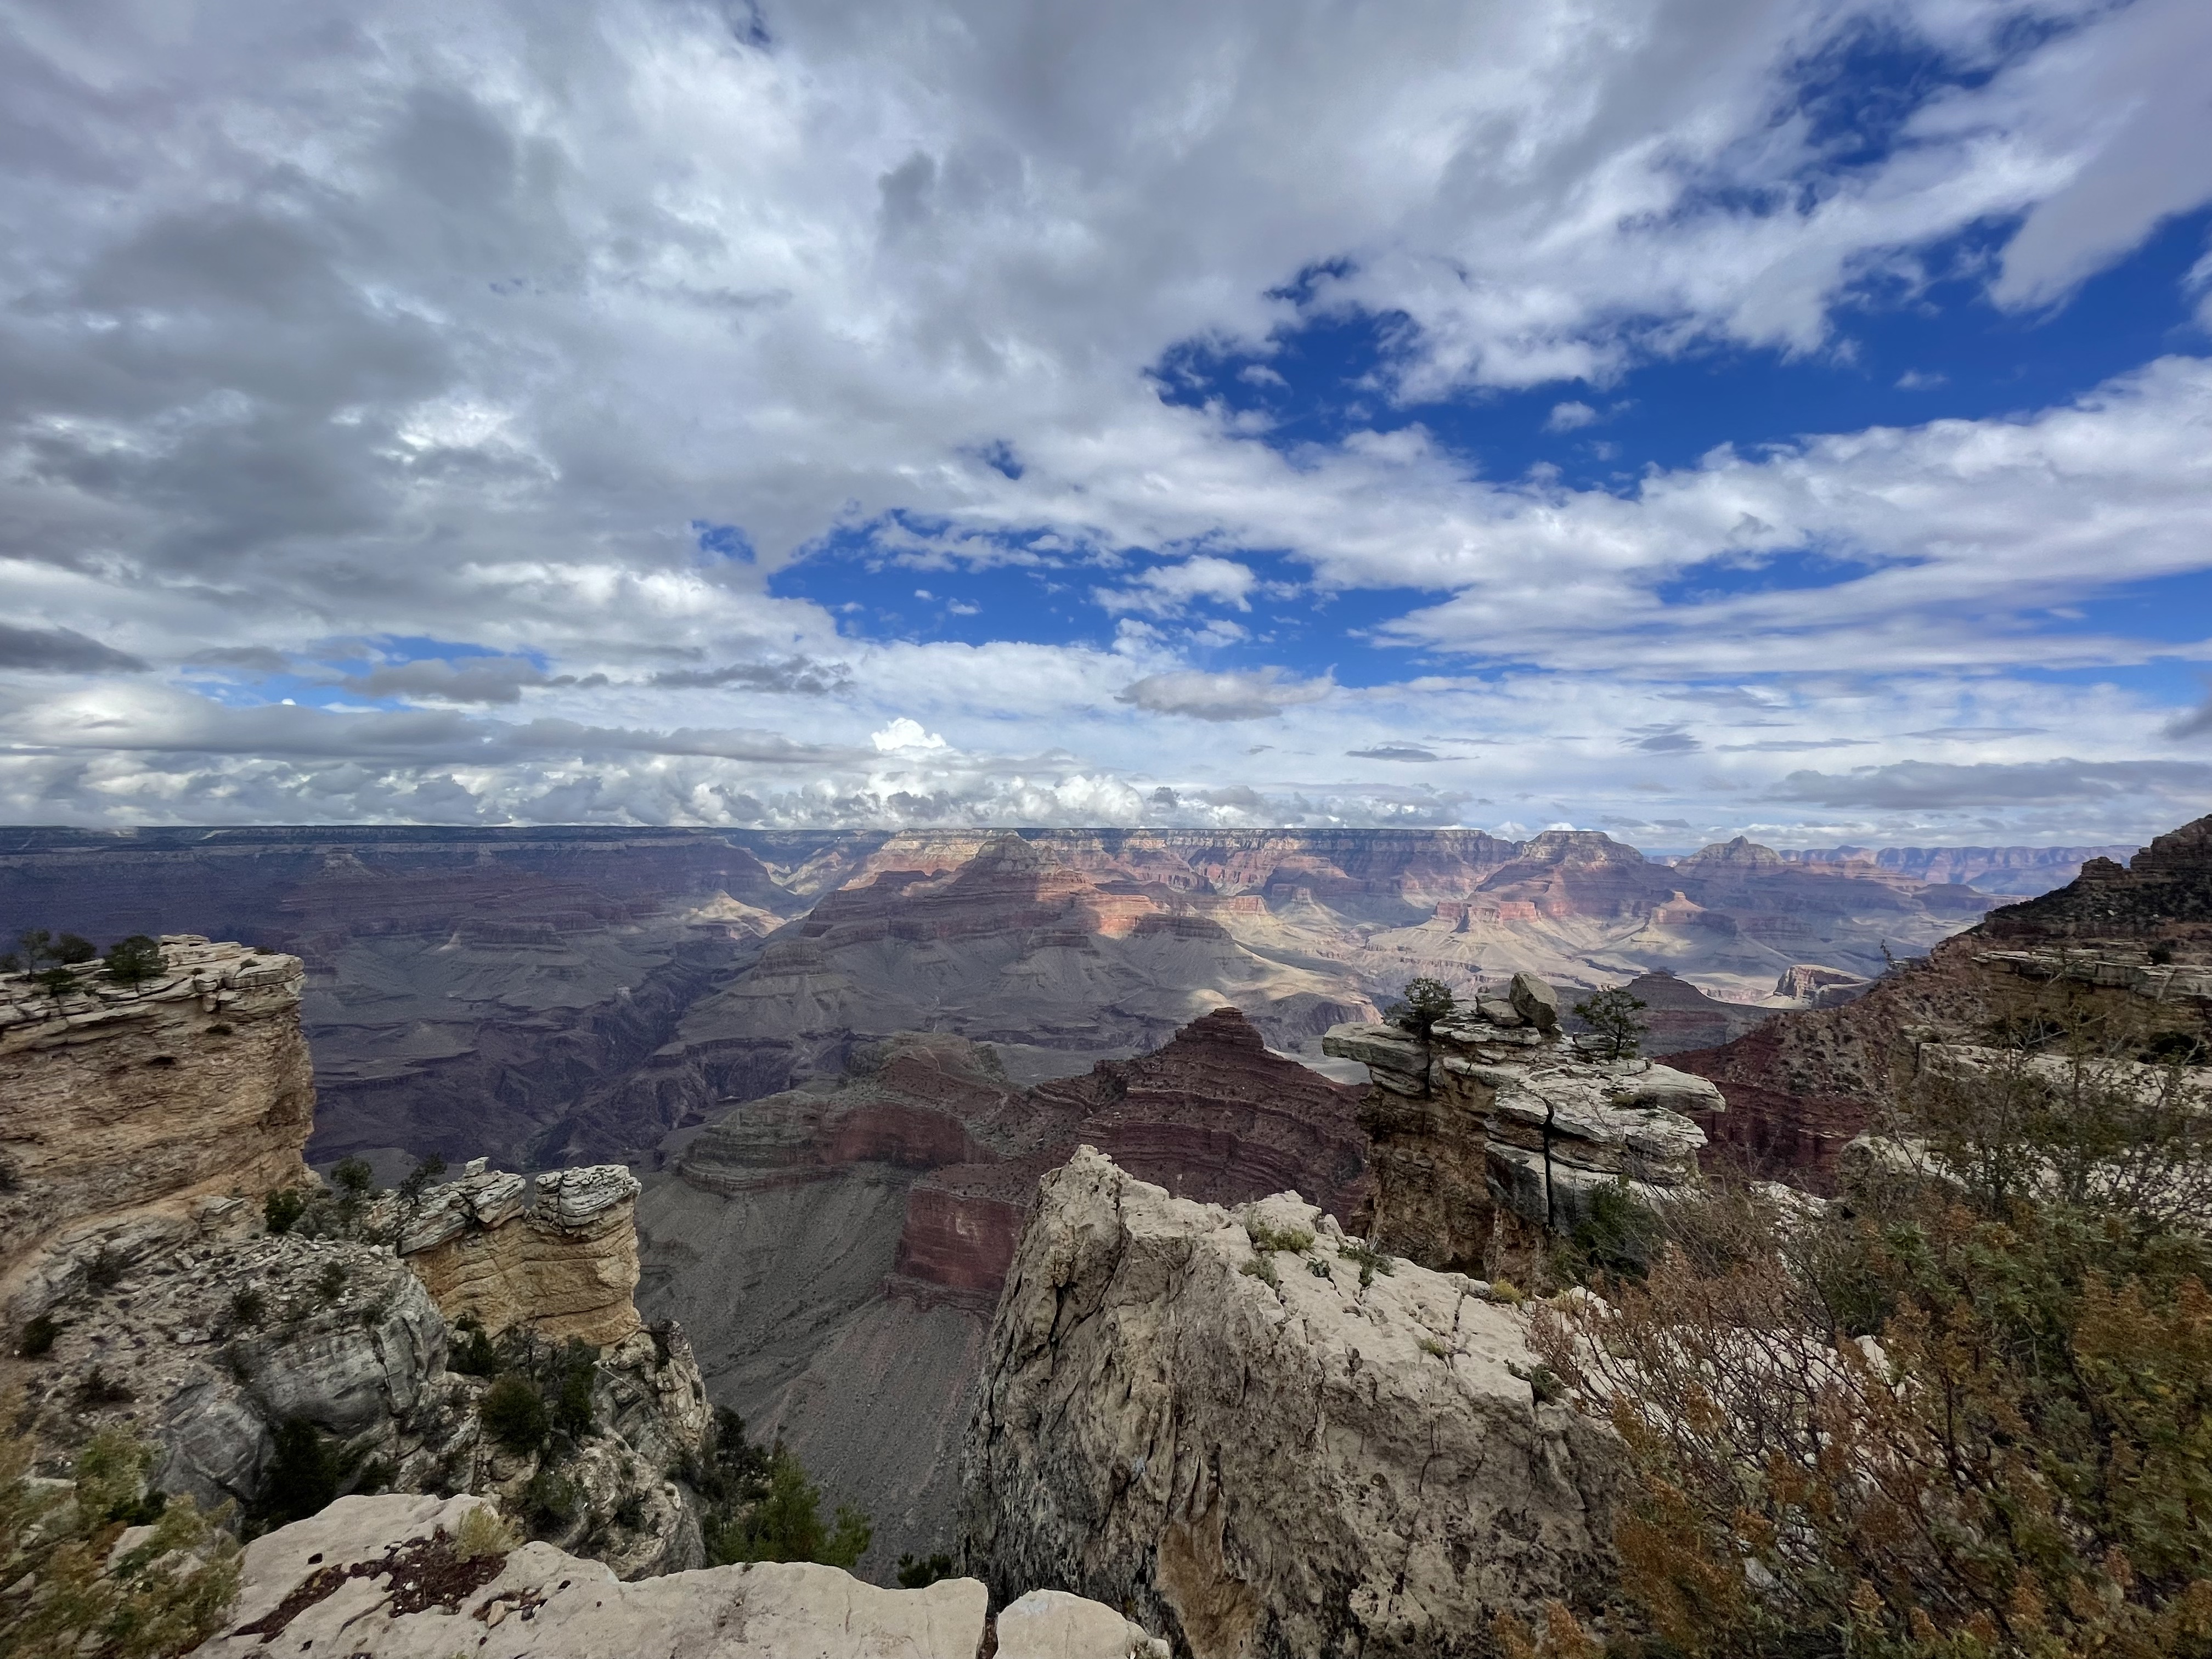 Clouds gather against a blue sky over a sweeping view of the Grand Canyon from Mather Point.